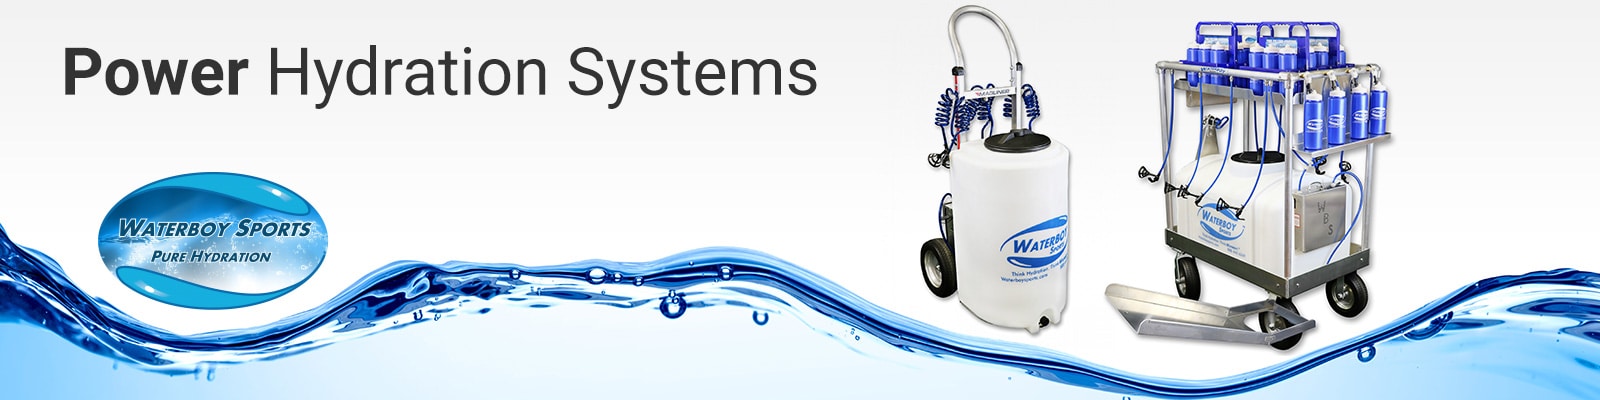 Waterboy Sports Power Hydration Systems - Henry Schein Medical